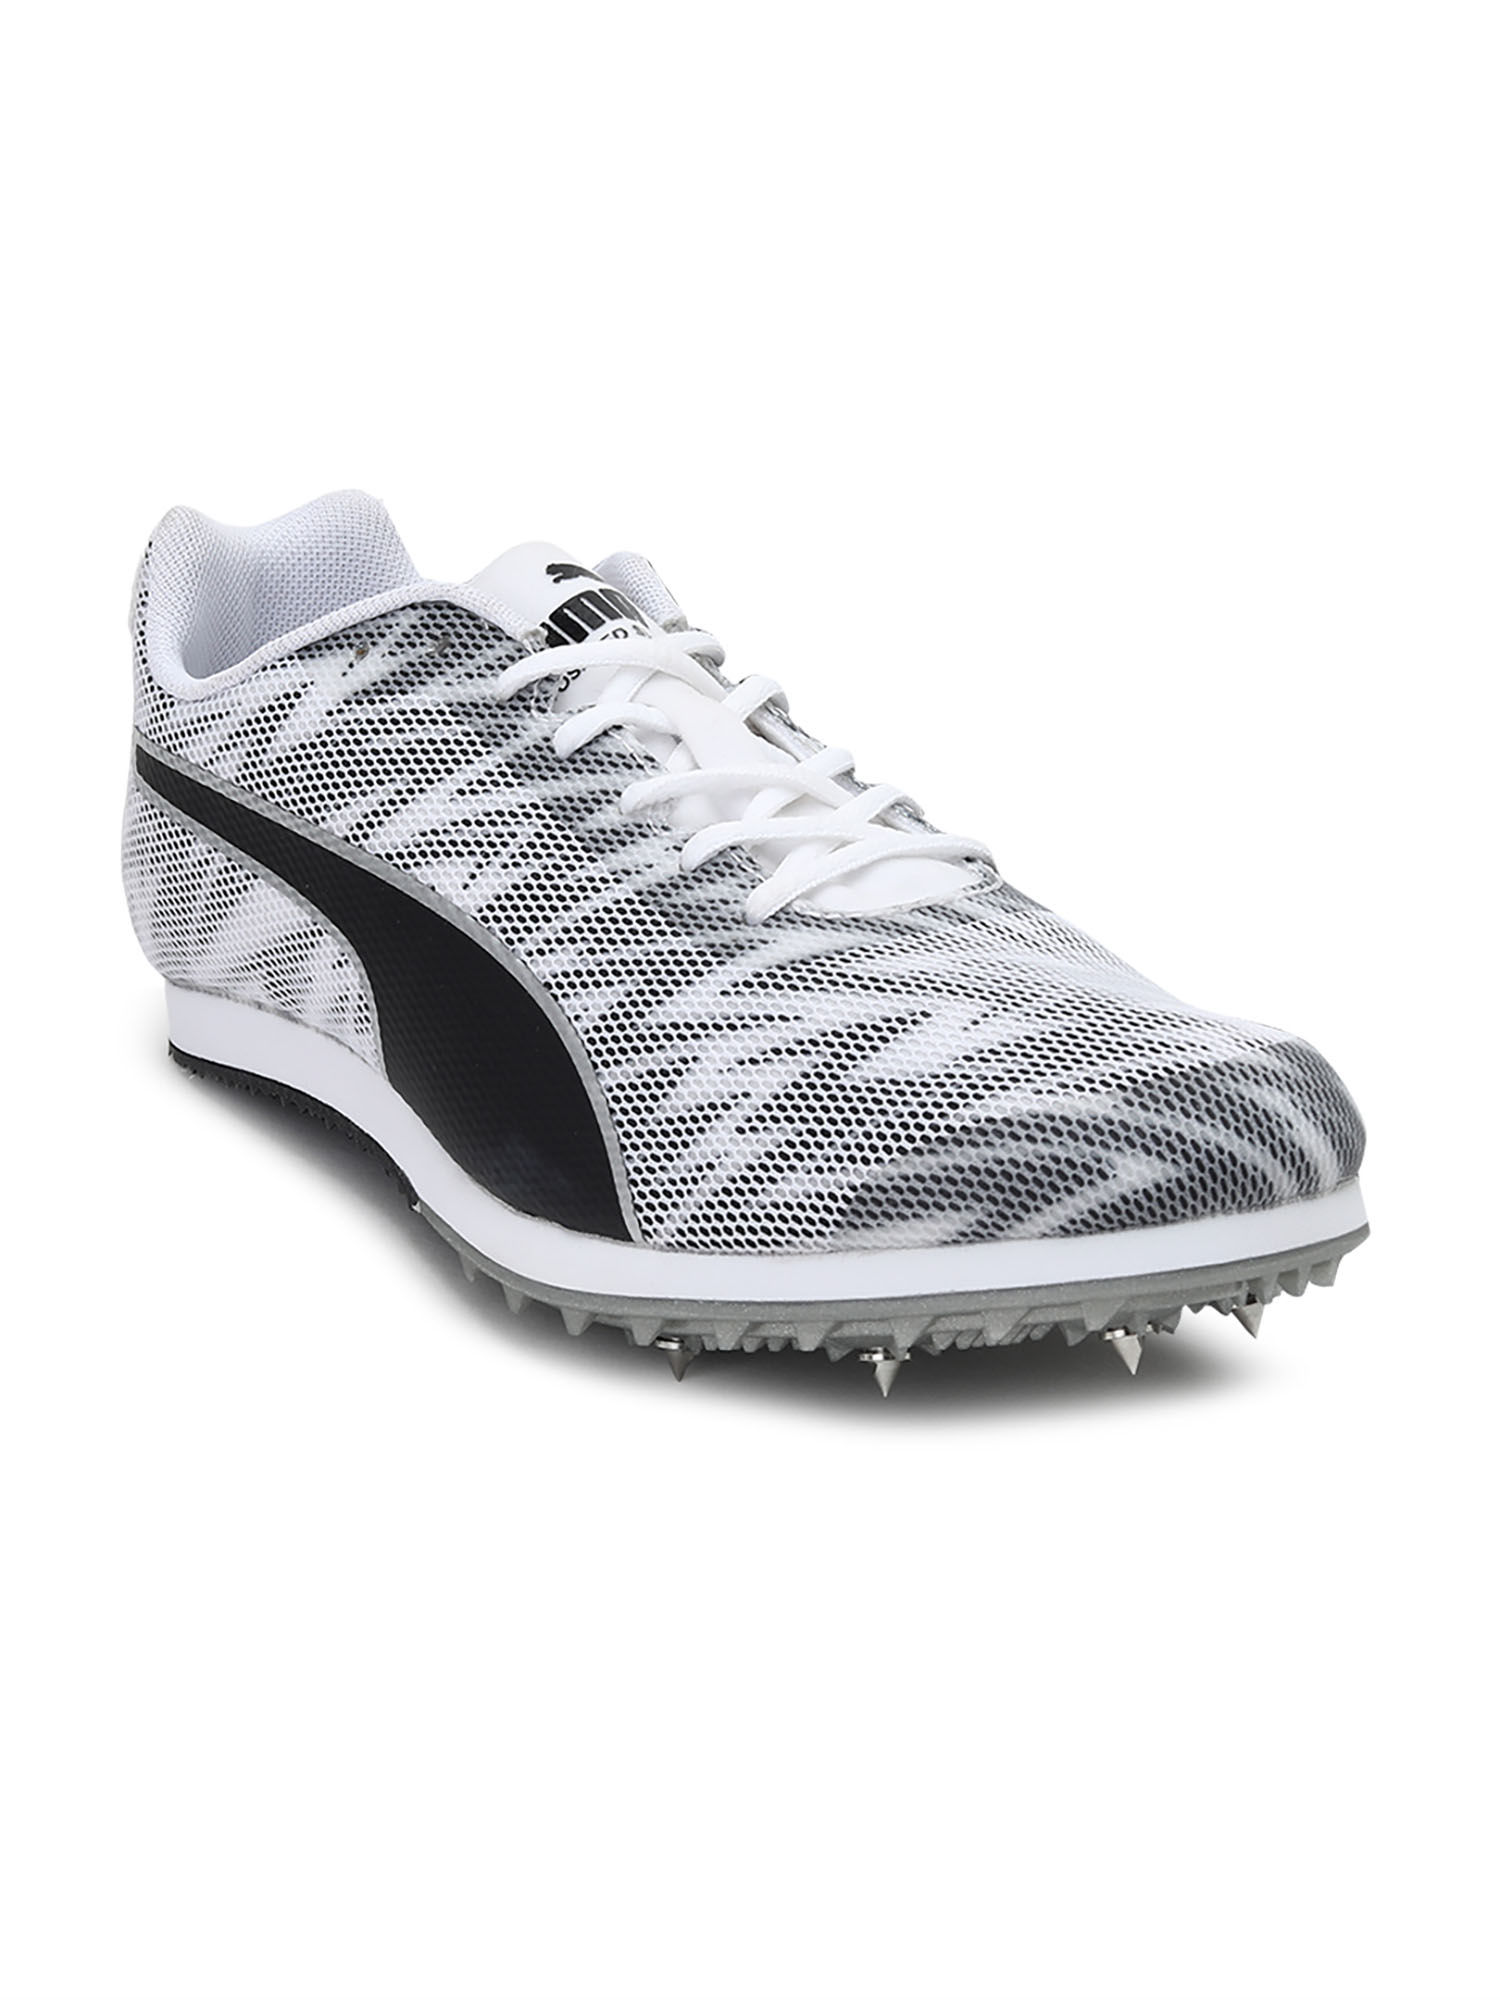 Puma Evospeed Star 7 Track Youth Spikes Shoes: Buy Evospeed Star 7 Track And Field Youth Spikes Running Shoes Online at Best Price in India | Nykaa